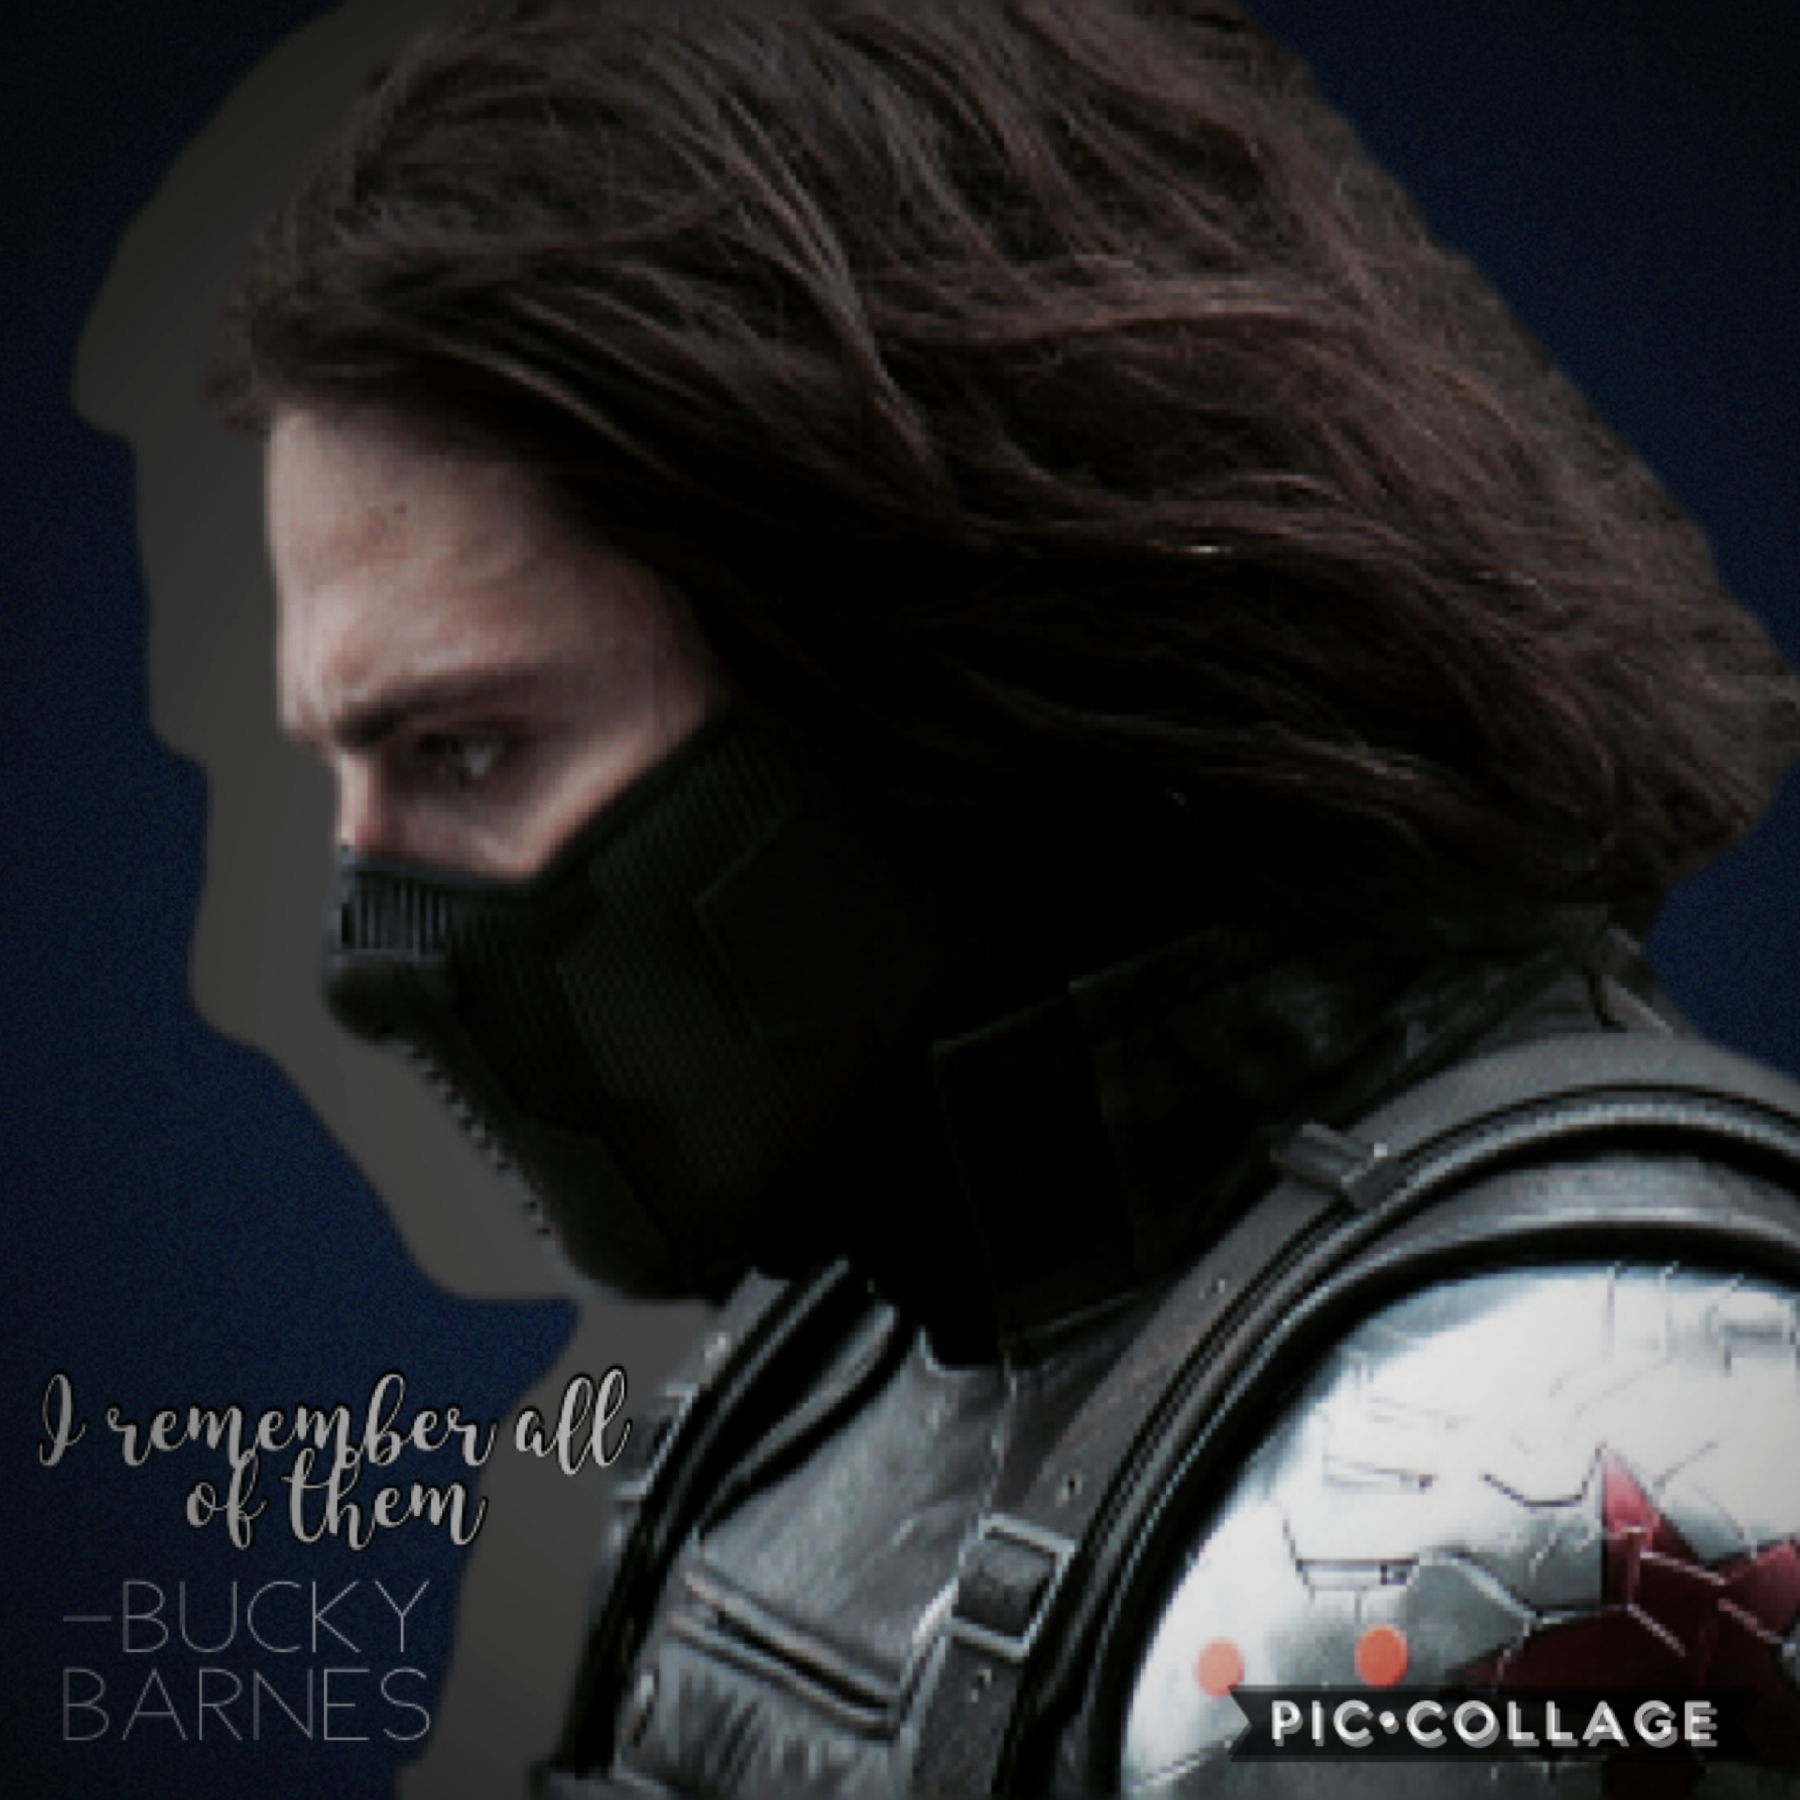 Bucky Barnes week is officially started.